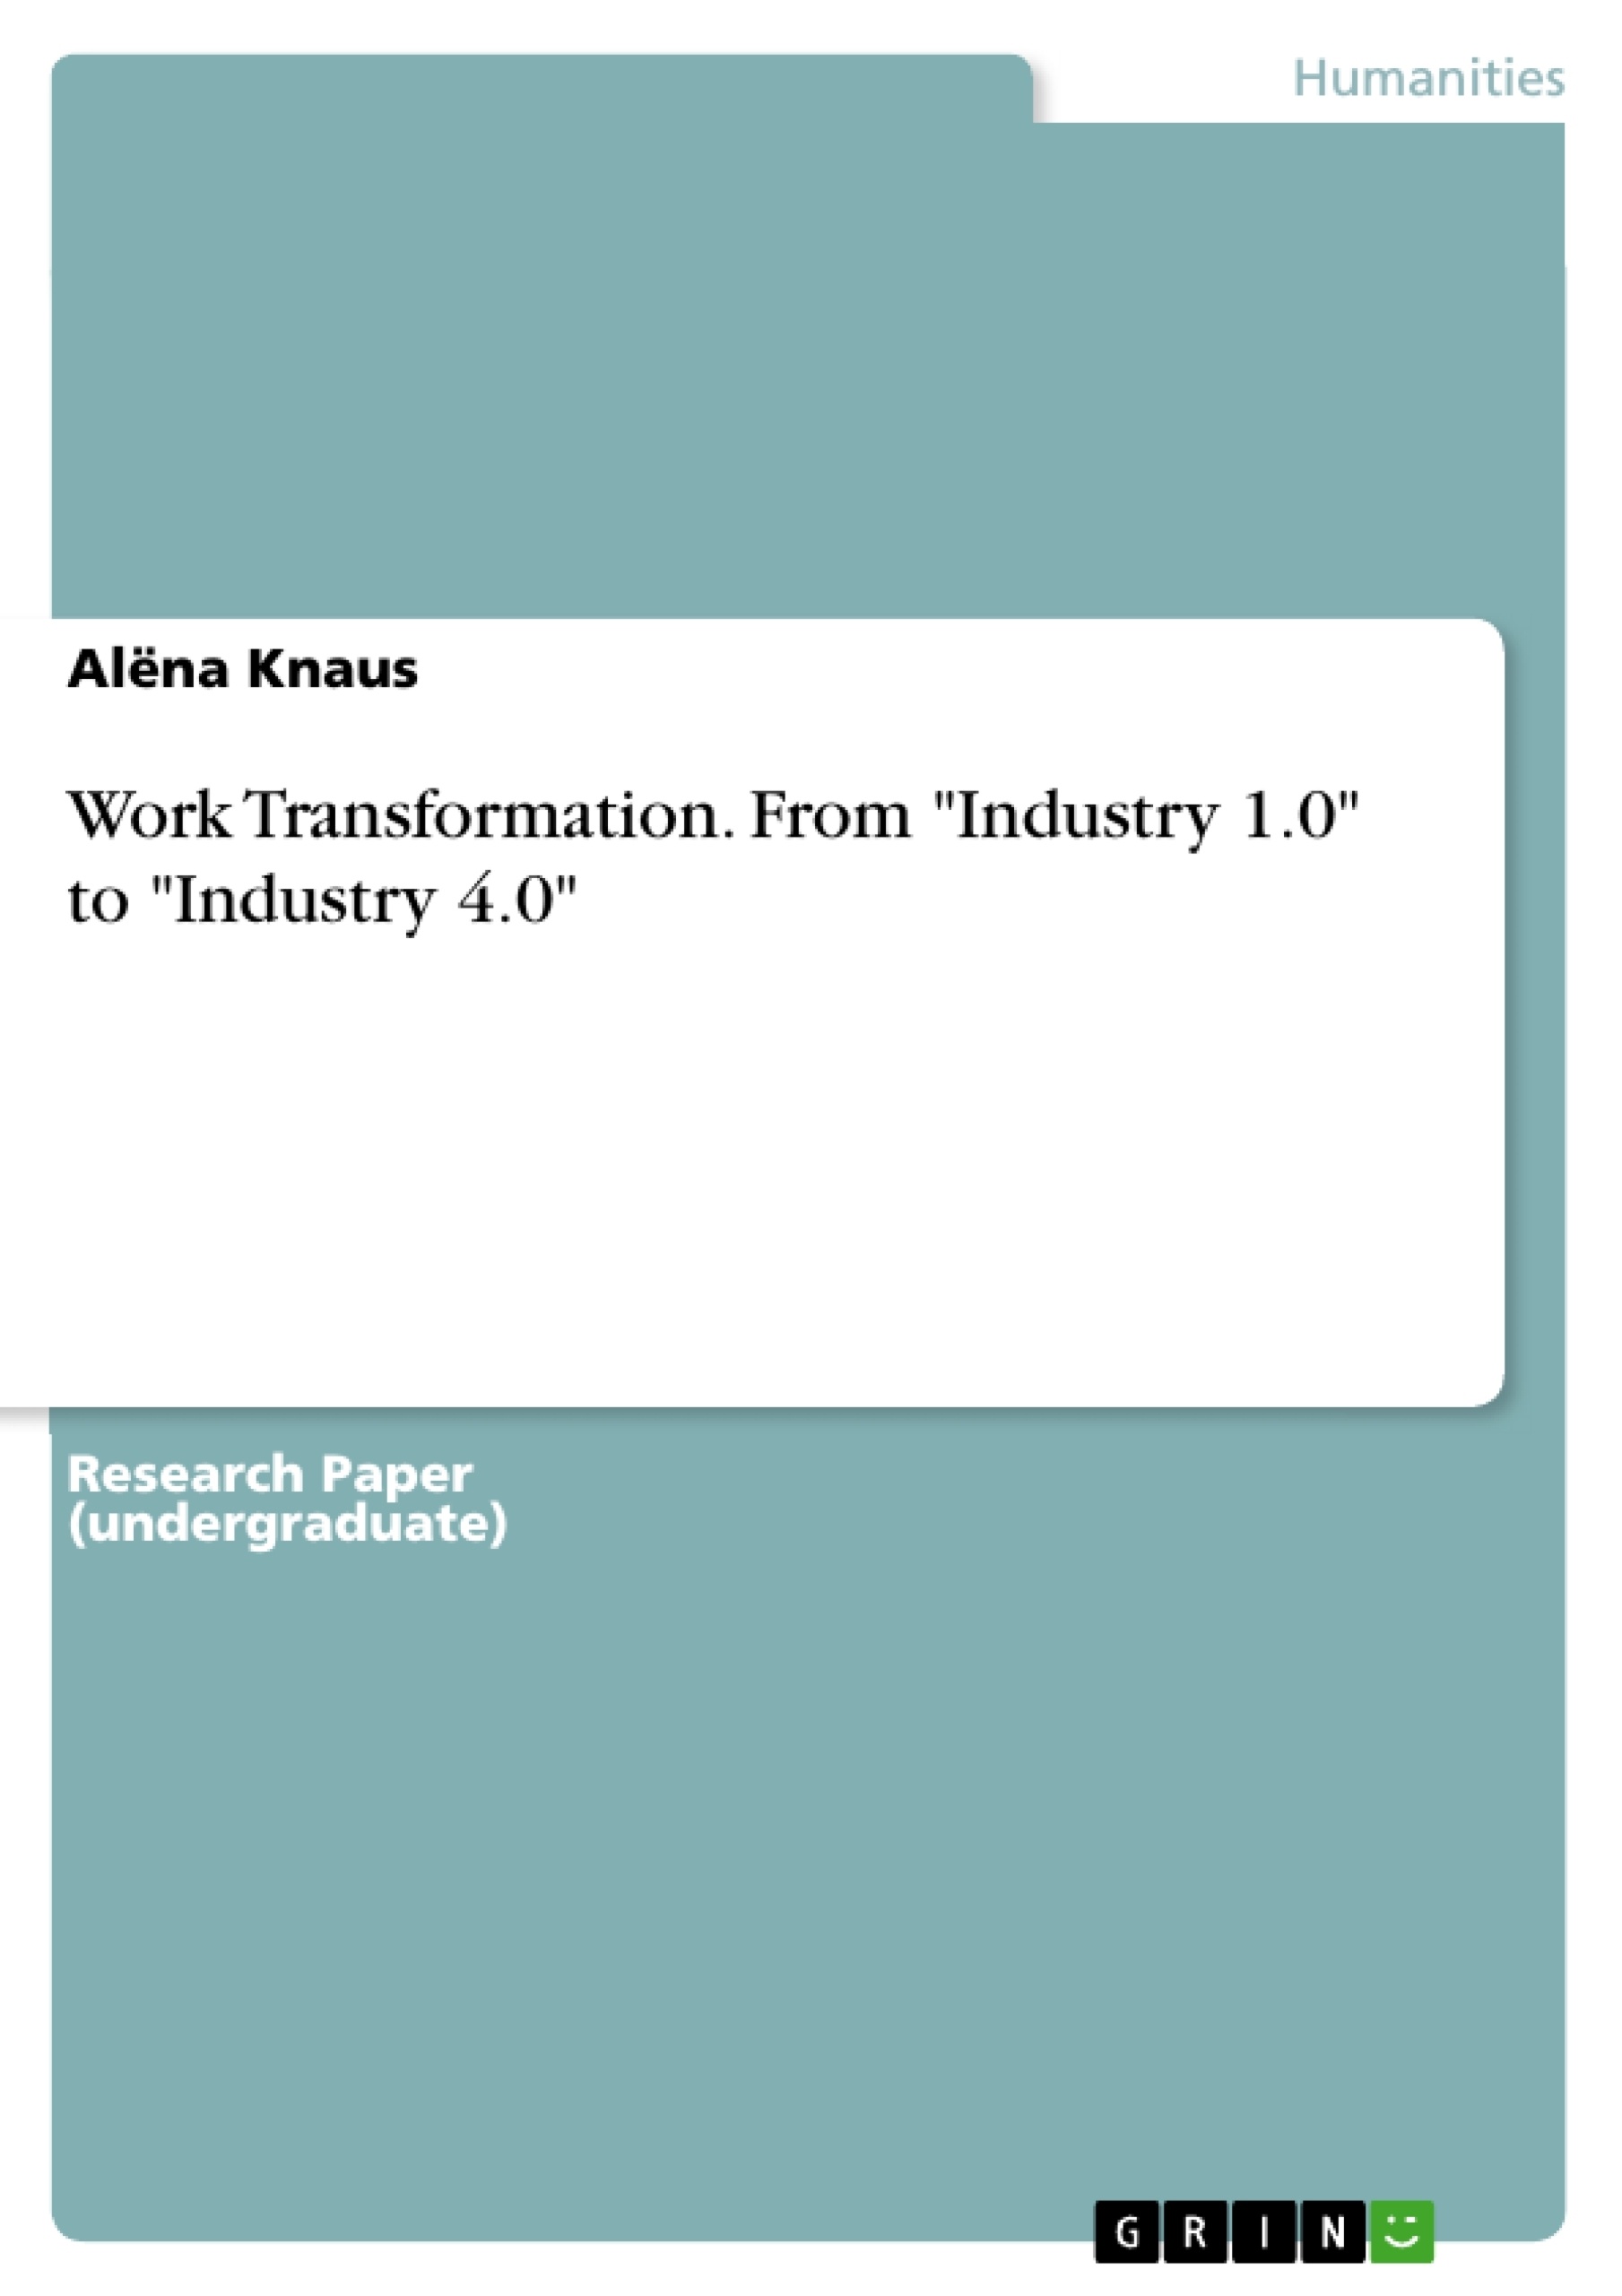 Title: Work Transformation. From "Industry 1.0" to "Industry 4.0"